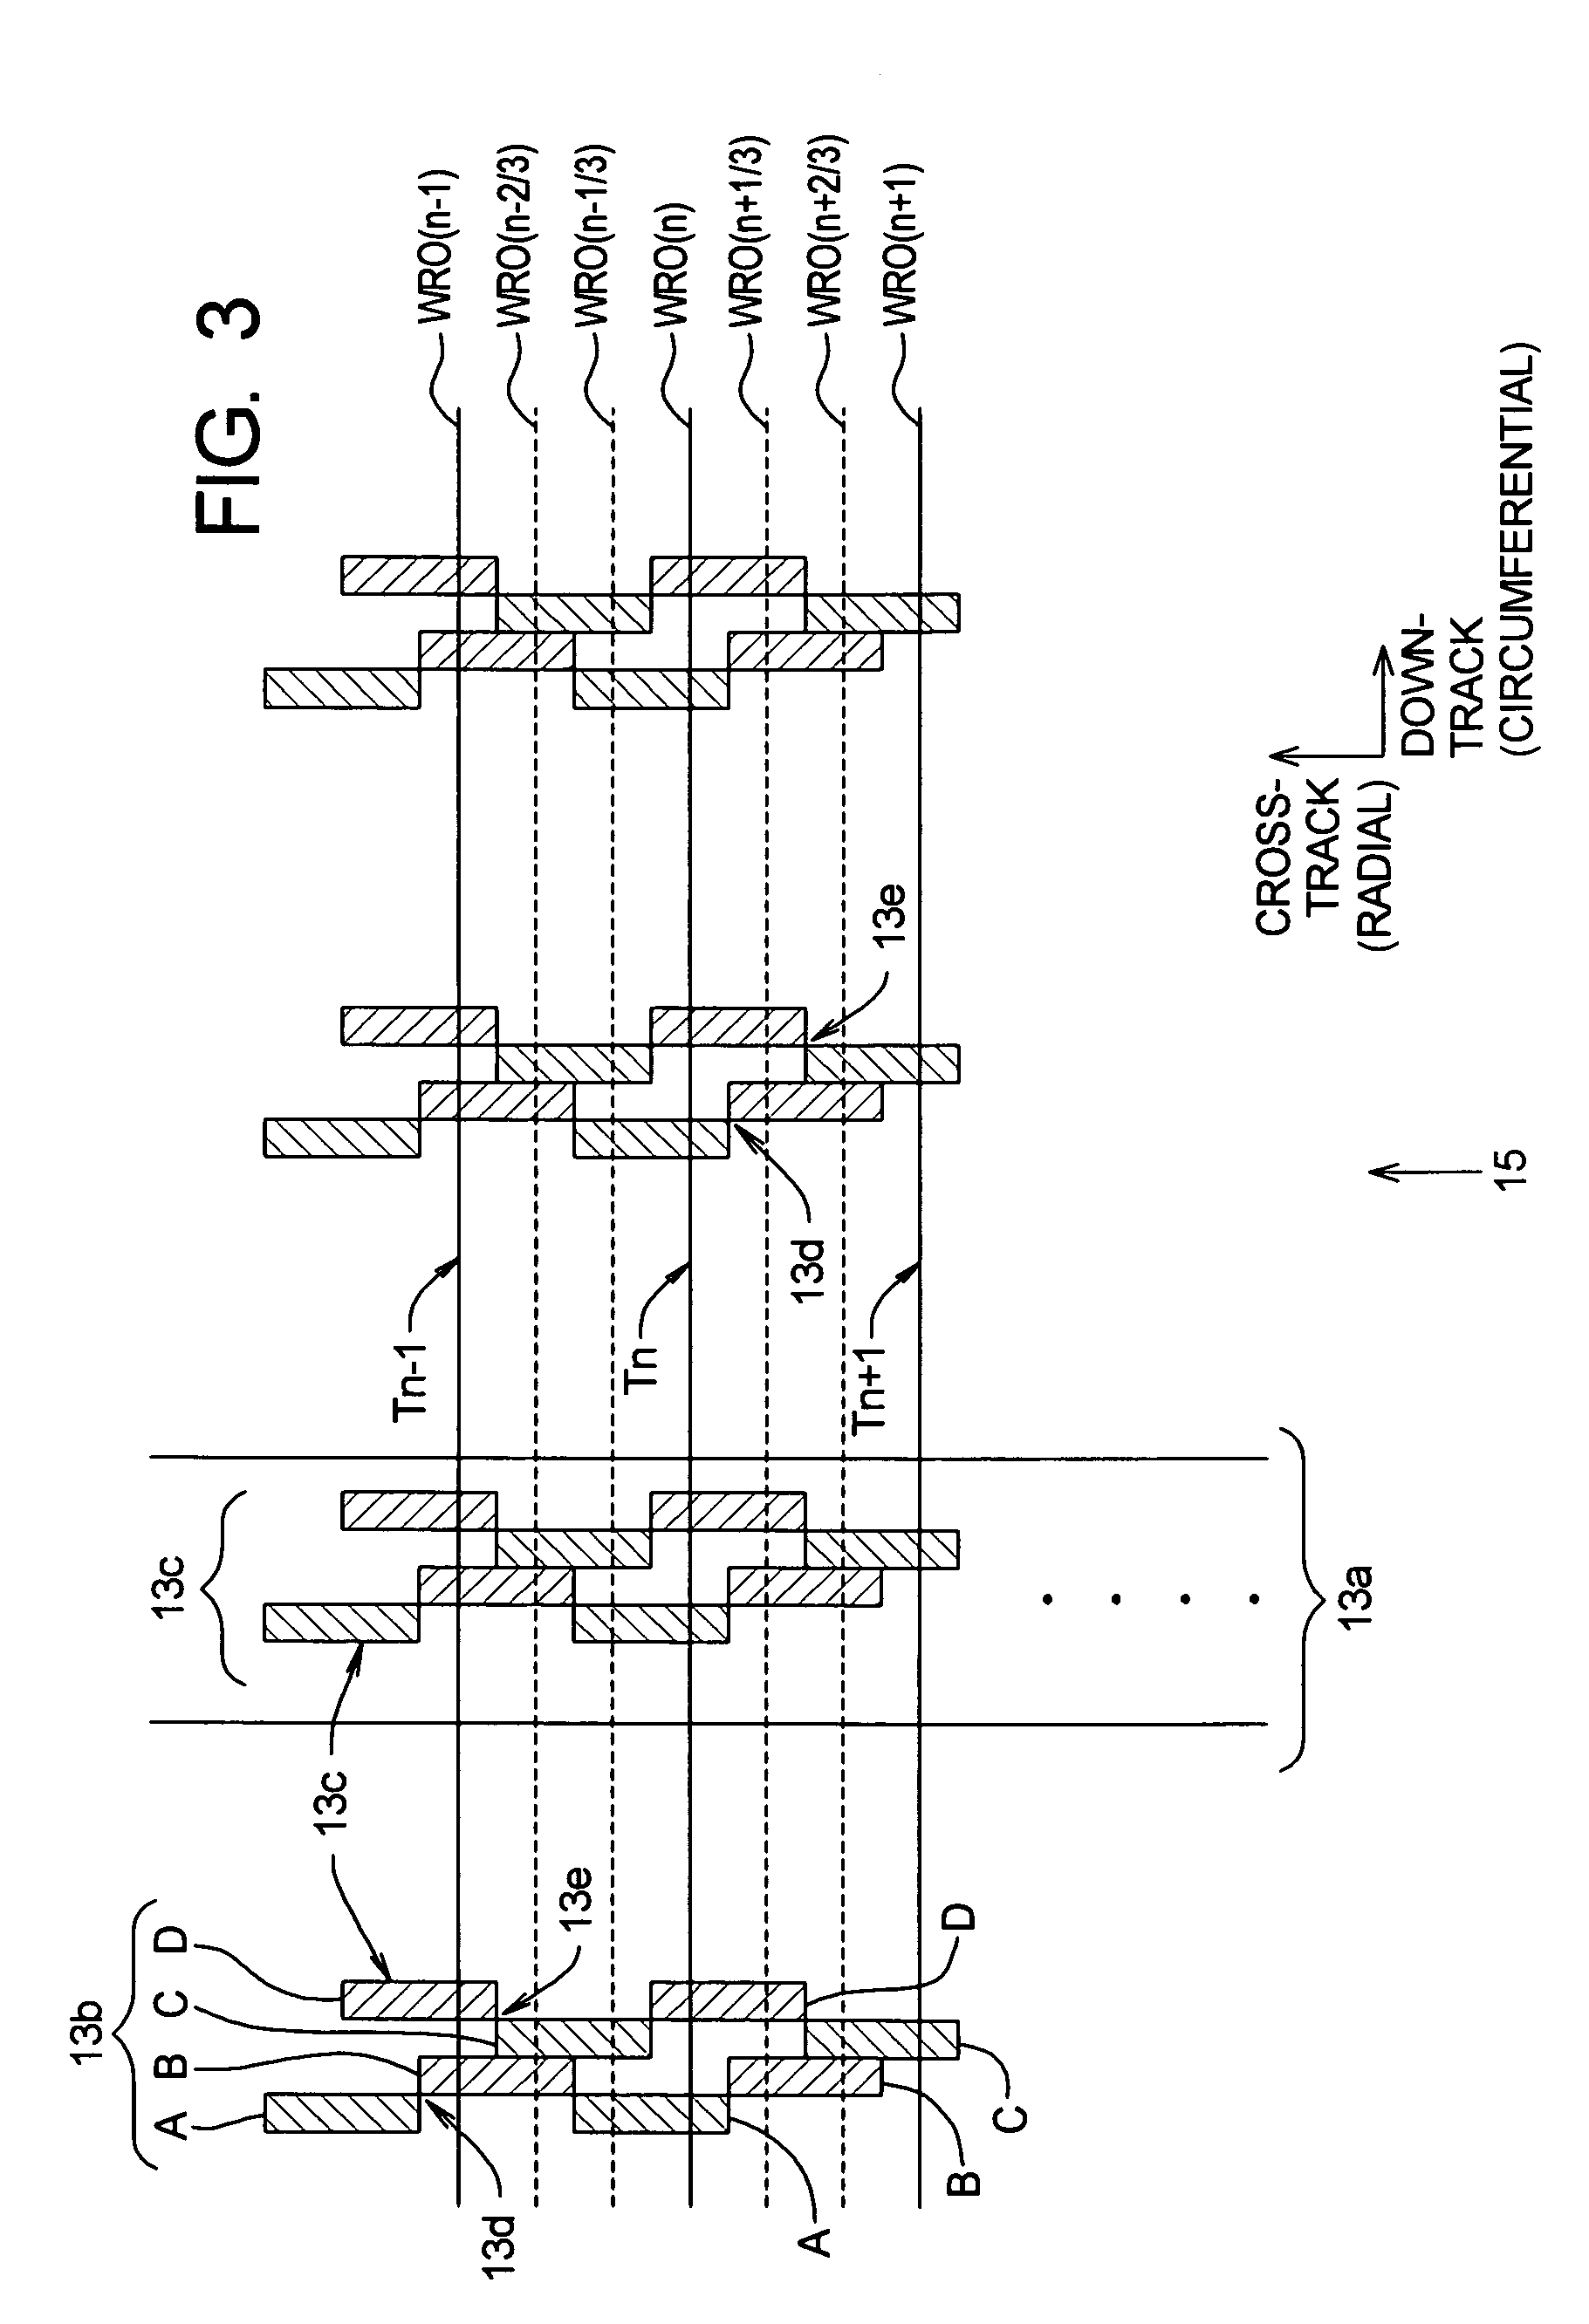 Method to correct radial misposition of data tracks using stitched correction fields